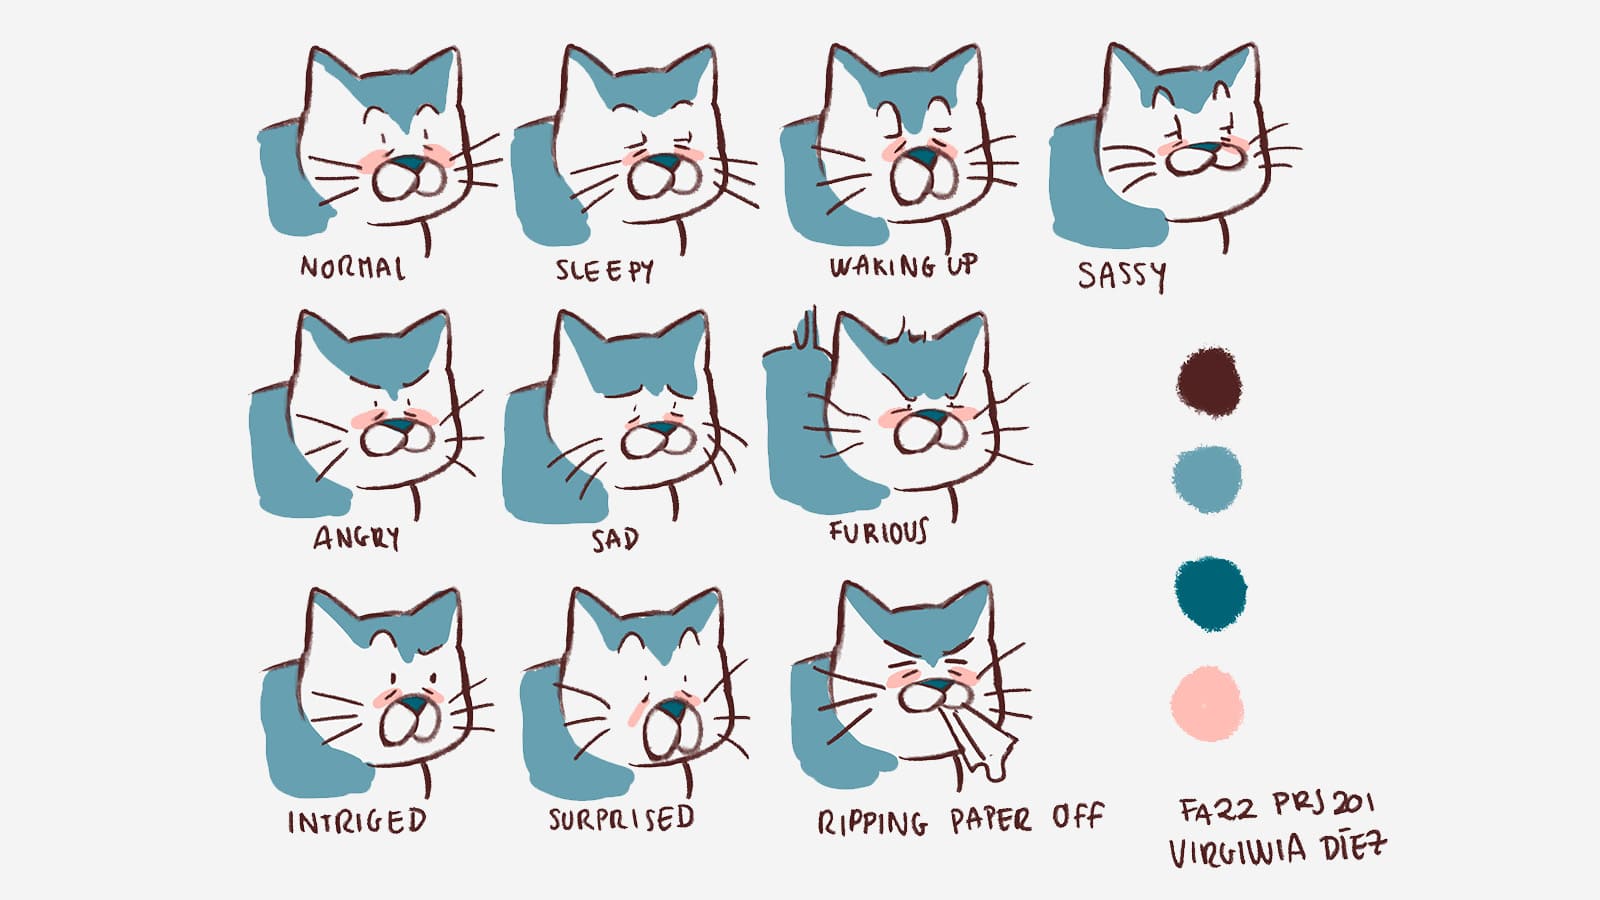 Drawings of the different moods of a cat and the color palette used.